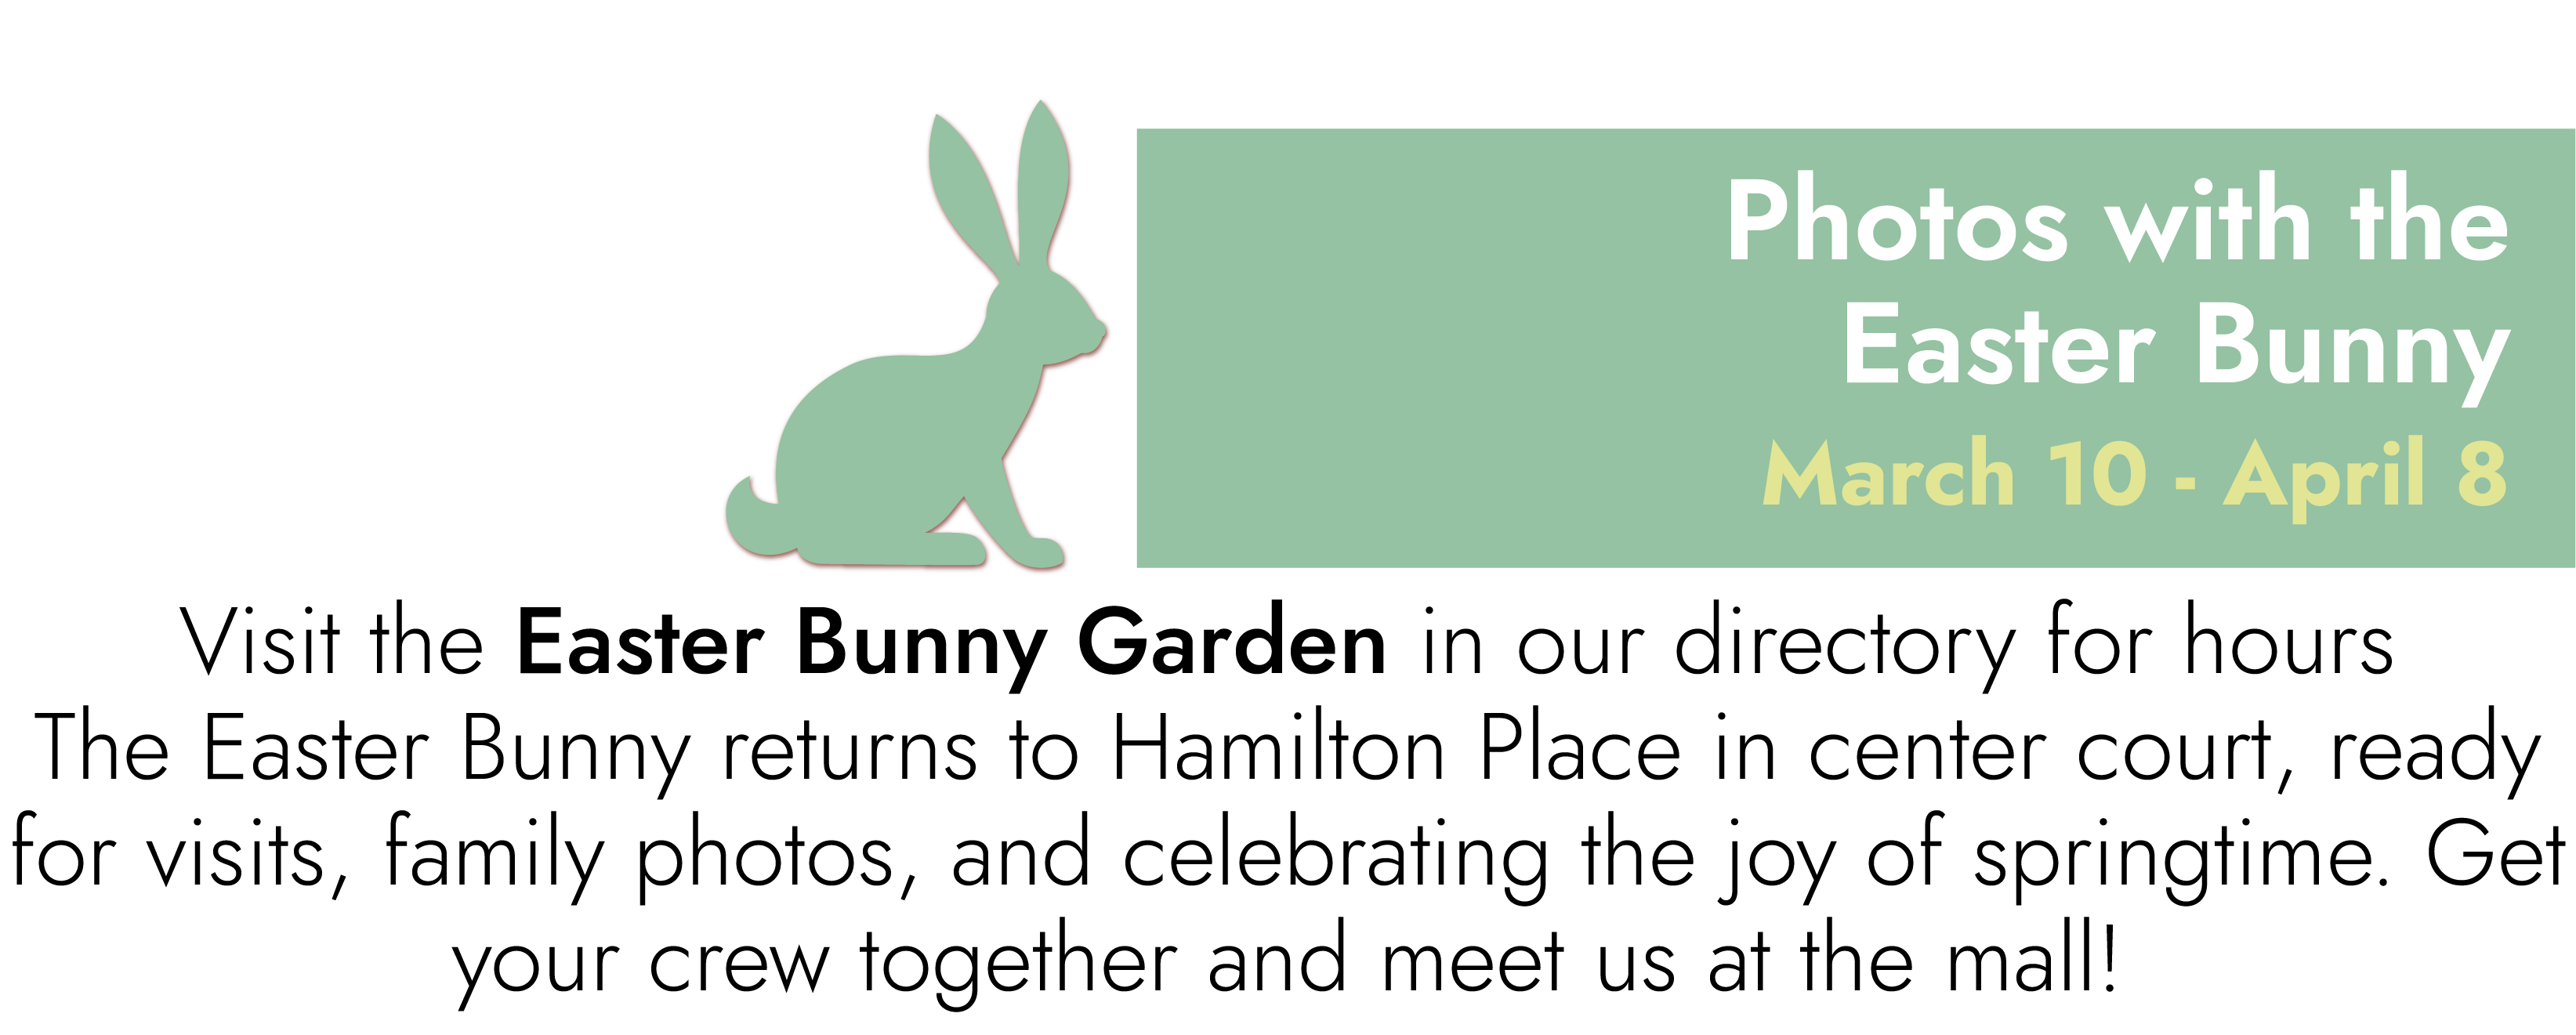 Easter Bunny Photos March 10 – April 8 Visit the Easter Bunny Garden in our directory for hours The Easter Bunny returns to Hamilton Place in center court, ready for visits, family photos, and celebrating the joy of springtime. Get your crew together and meet us at the mall!